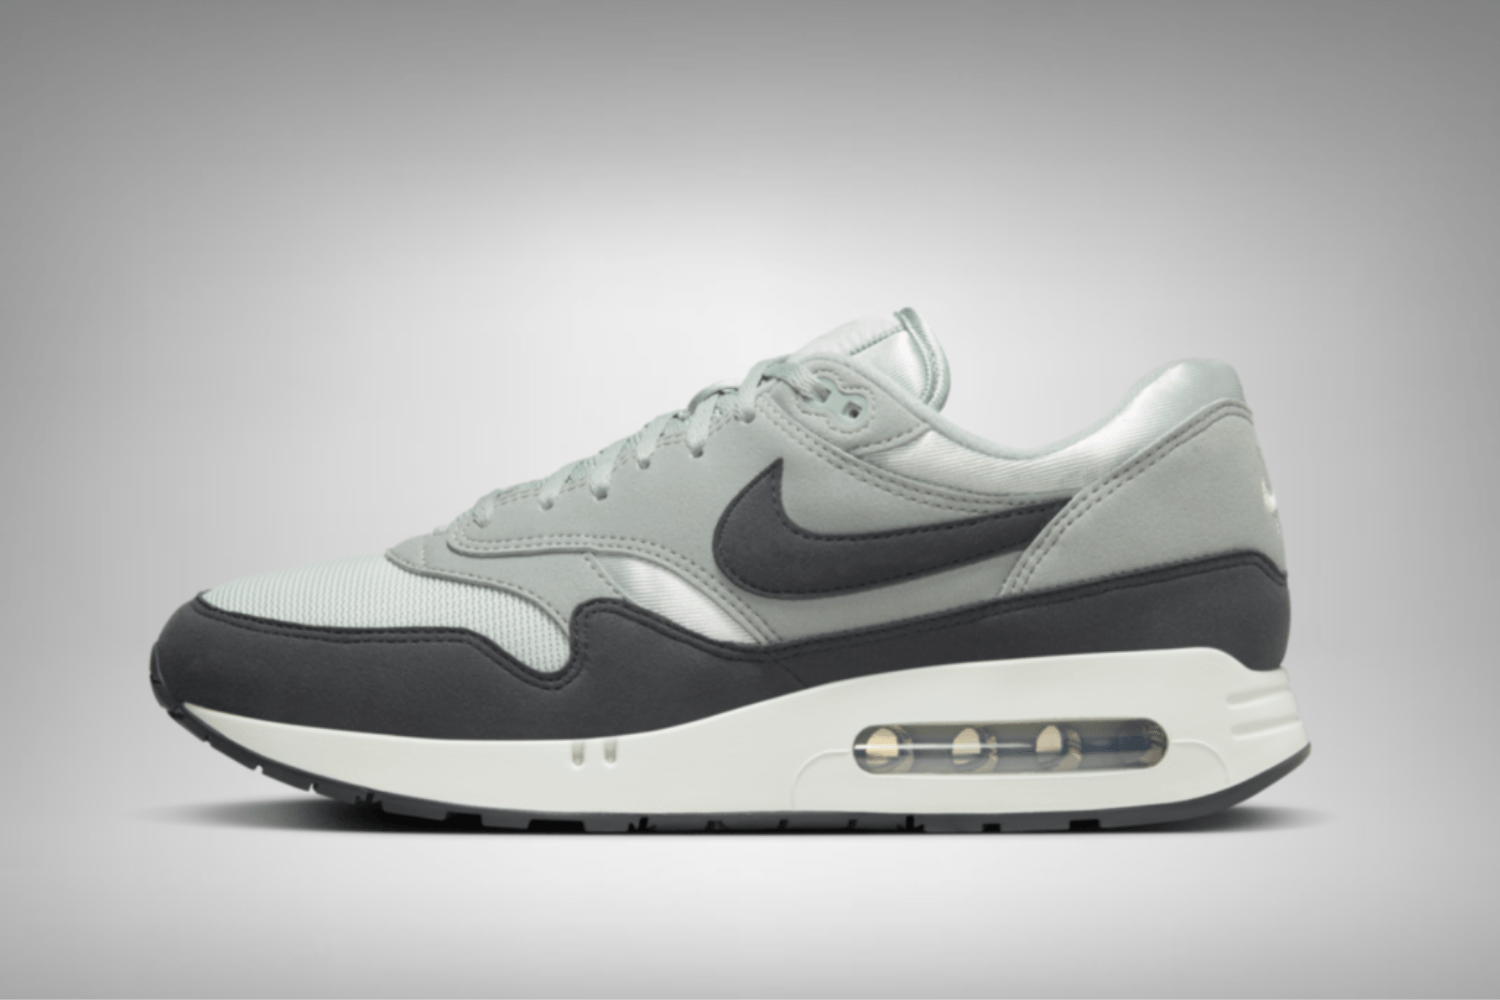 Nike Air Max 1 Big Bubble comes in a 'Greyscale' colorway